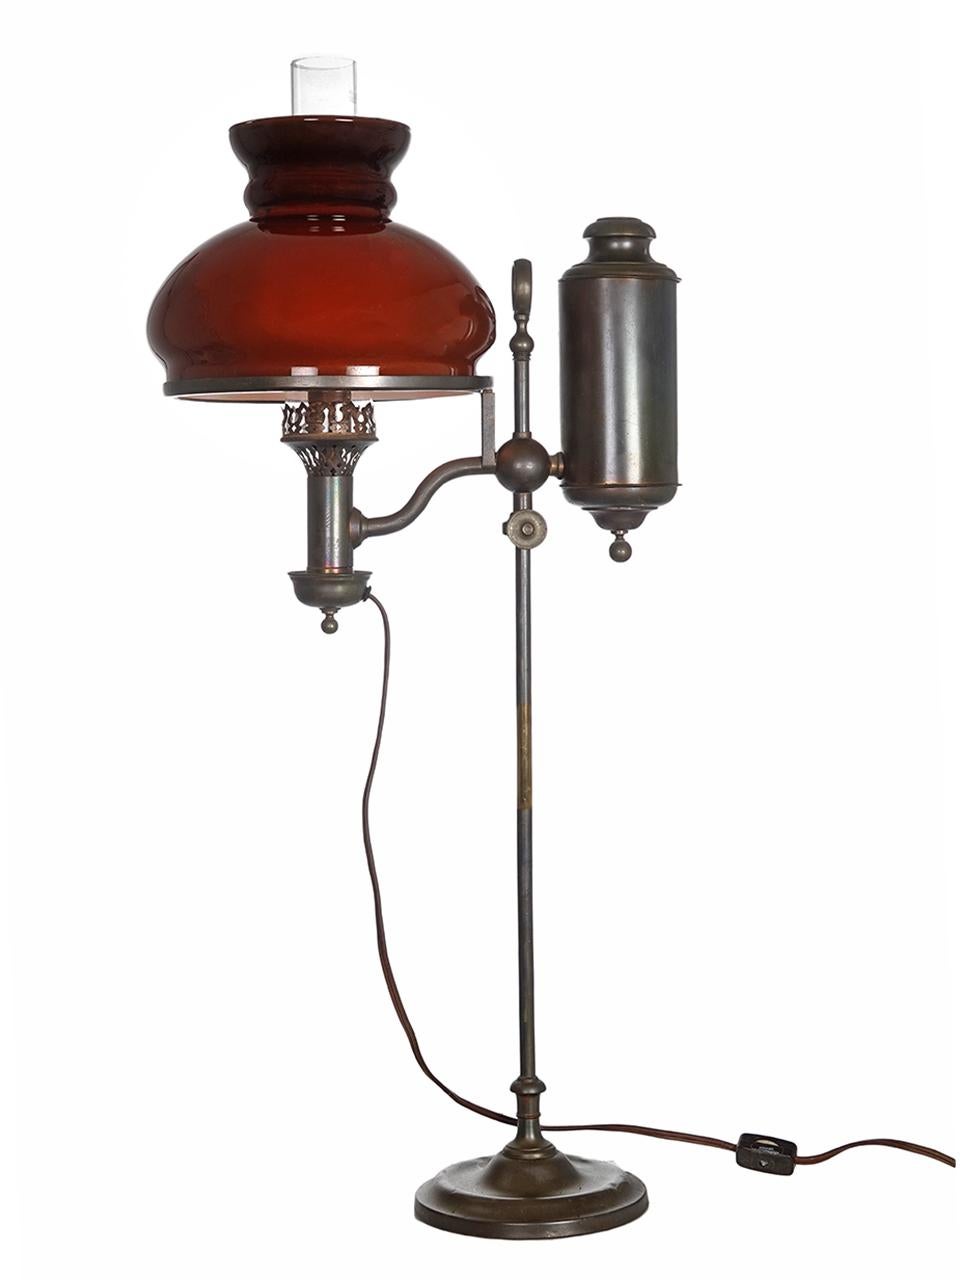 Victorian Brass Student lamp with original brown over white sandwich glass shade and clear glass chimney. This lamp is unsigned and most likely 1870s. The height can easily be adjusted and has been converted to electricity. It has not been